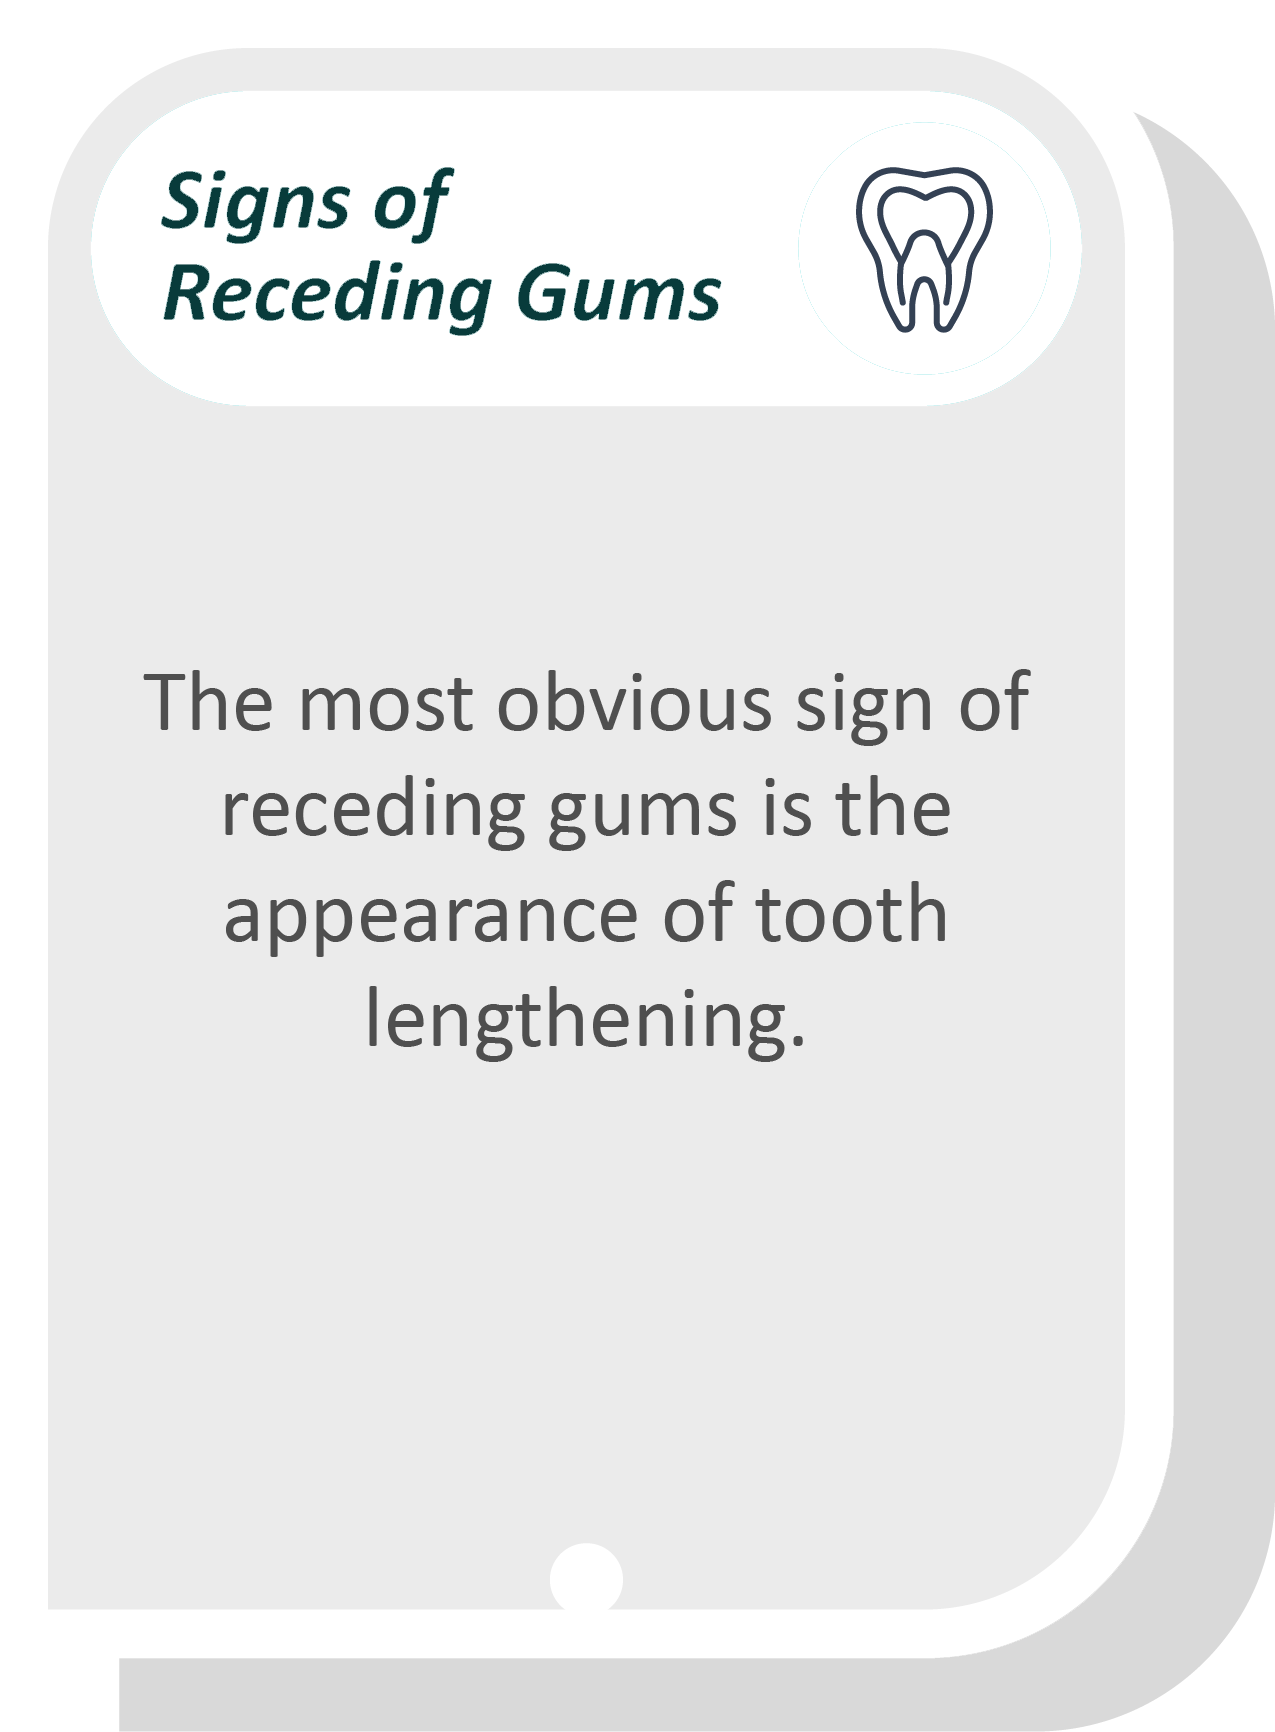 I think my gums are receding infographic: The most obvious sign of receding gums is the appearance of tooth lengthening.